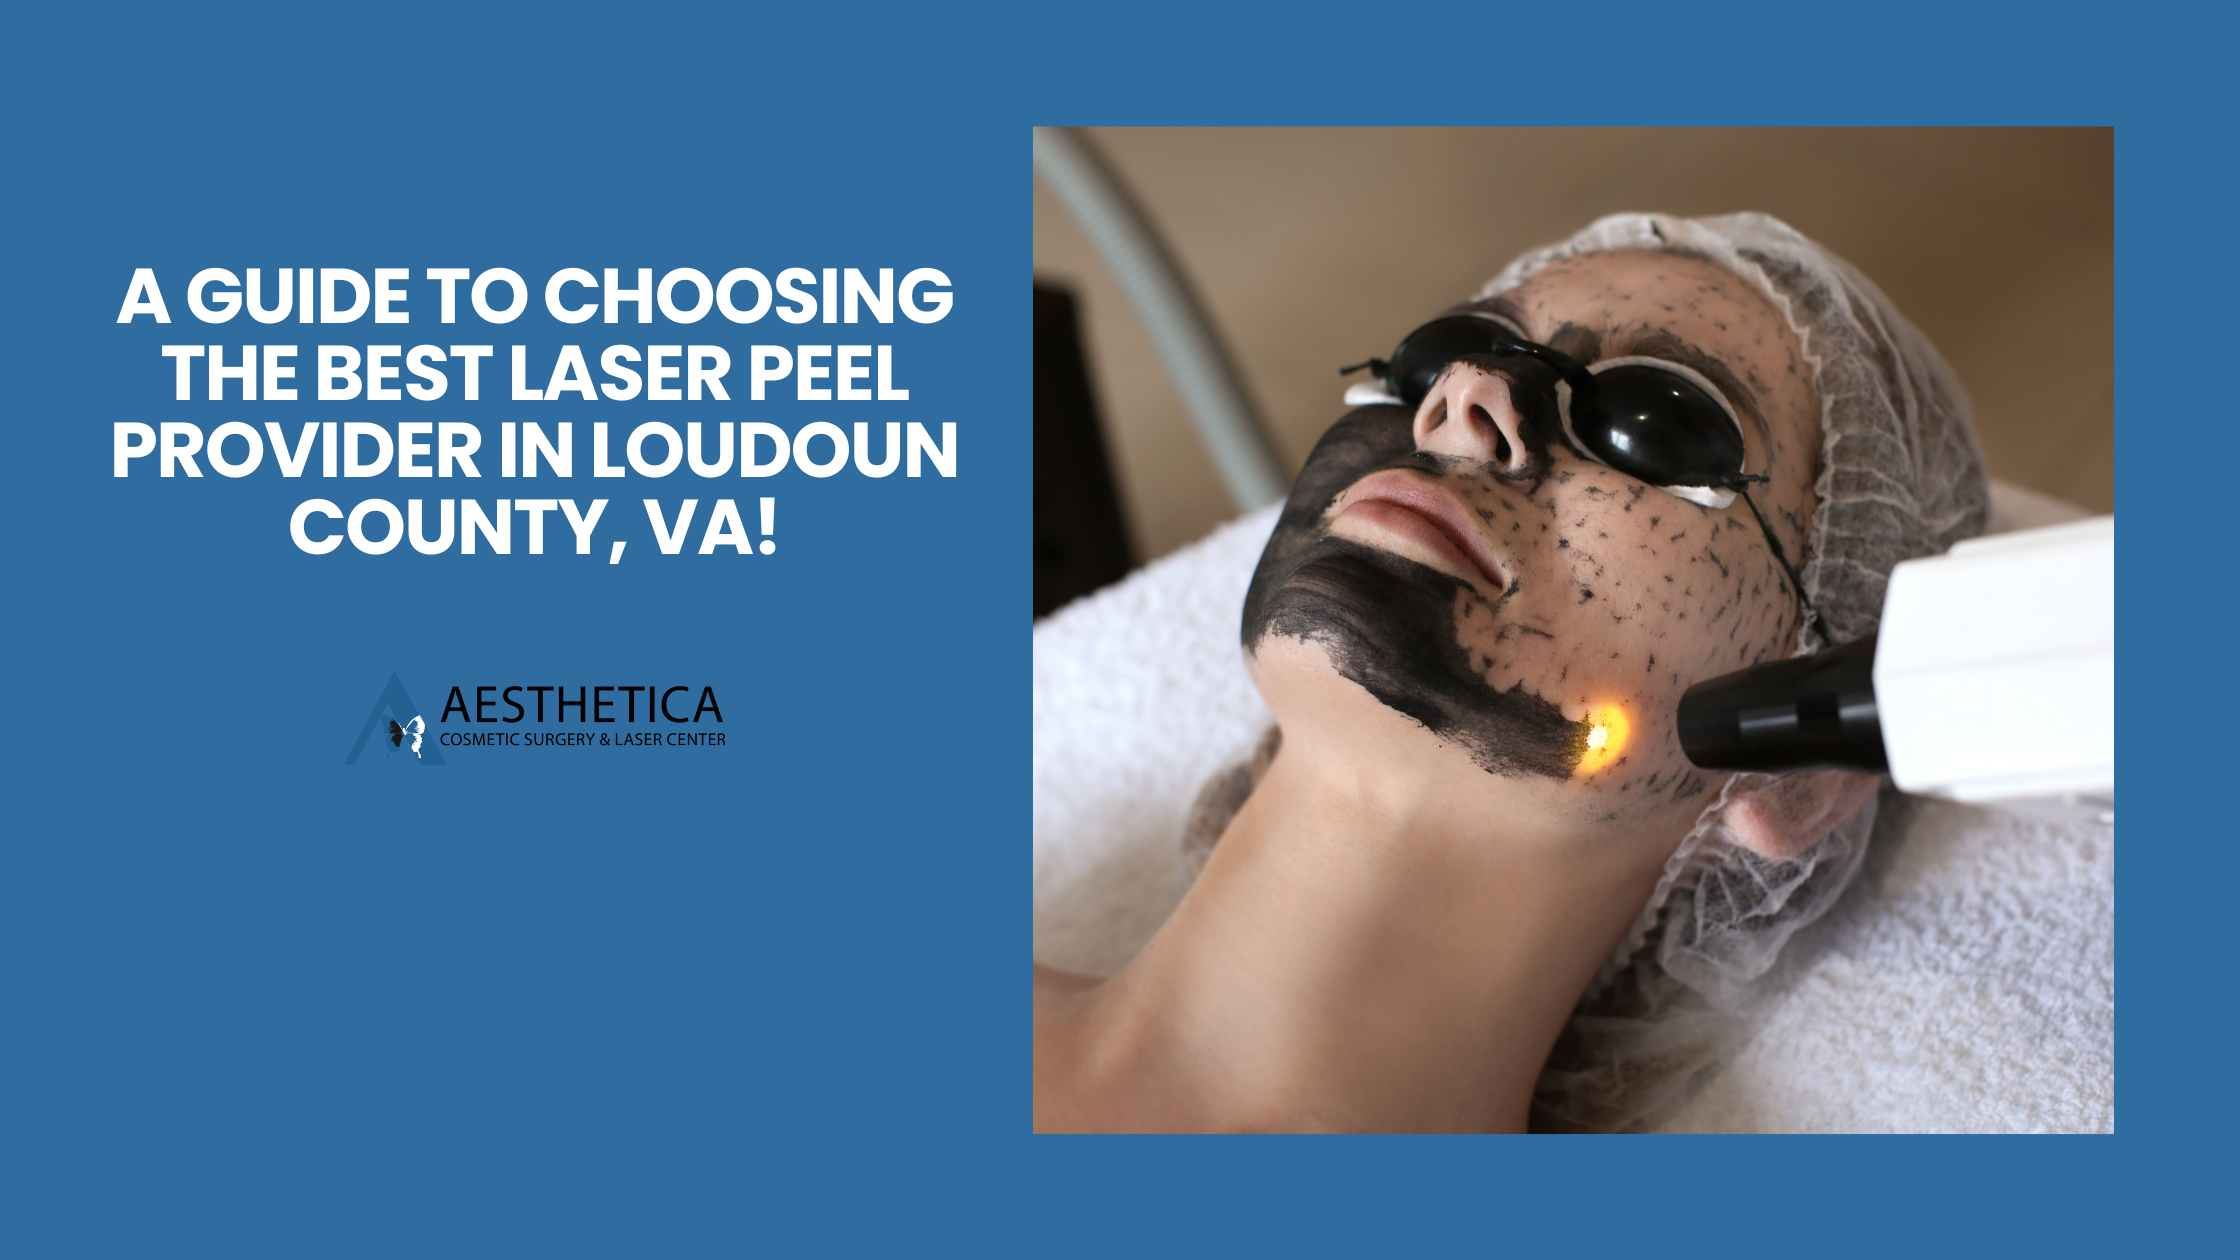 A Guide to Choosing the Best Laser Peel Provider in Loudoun County, VA!